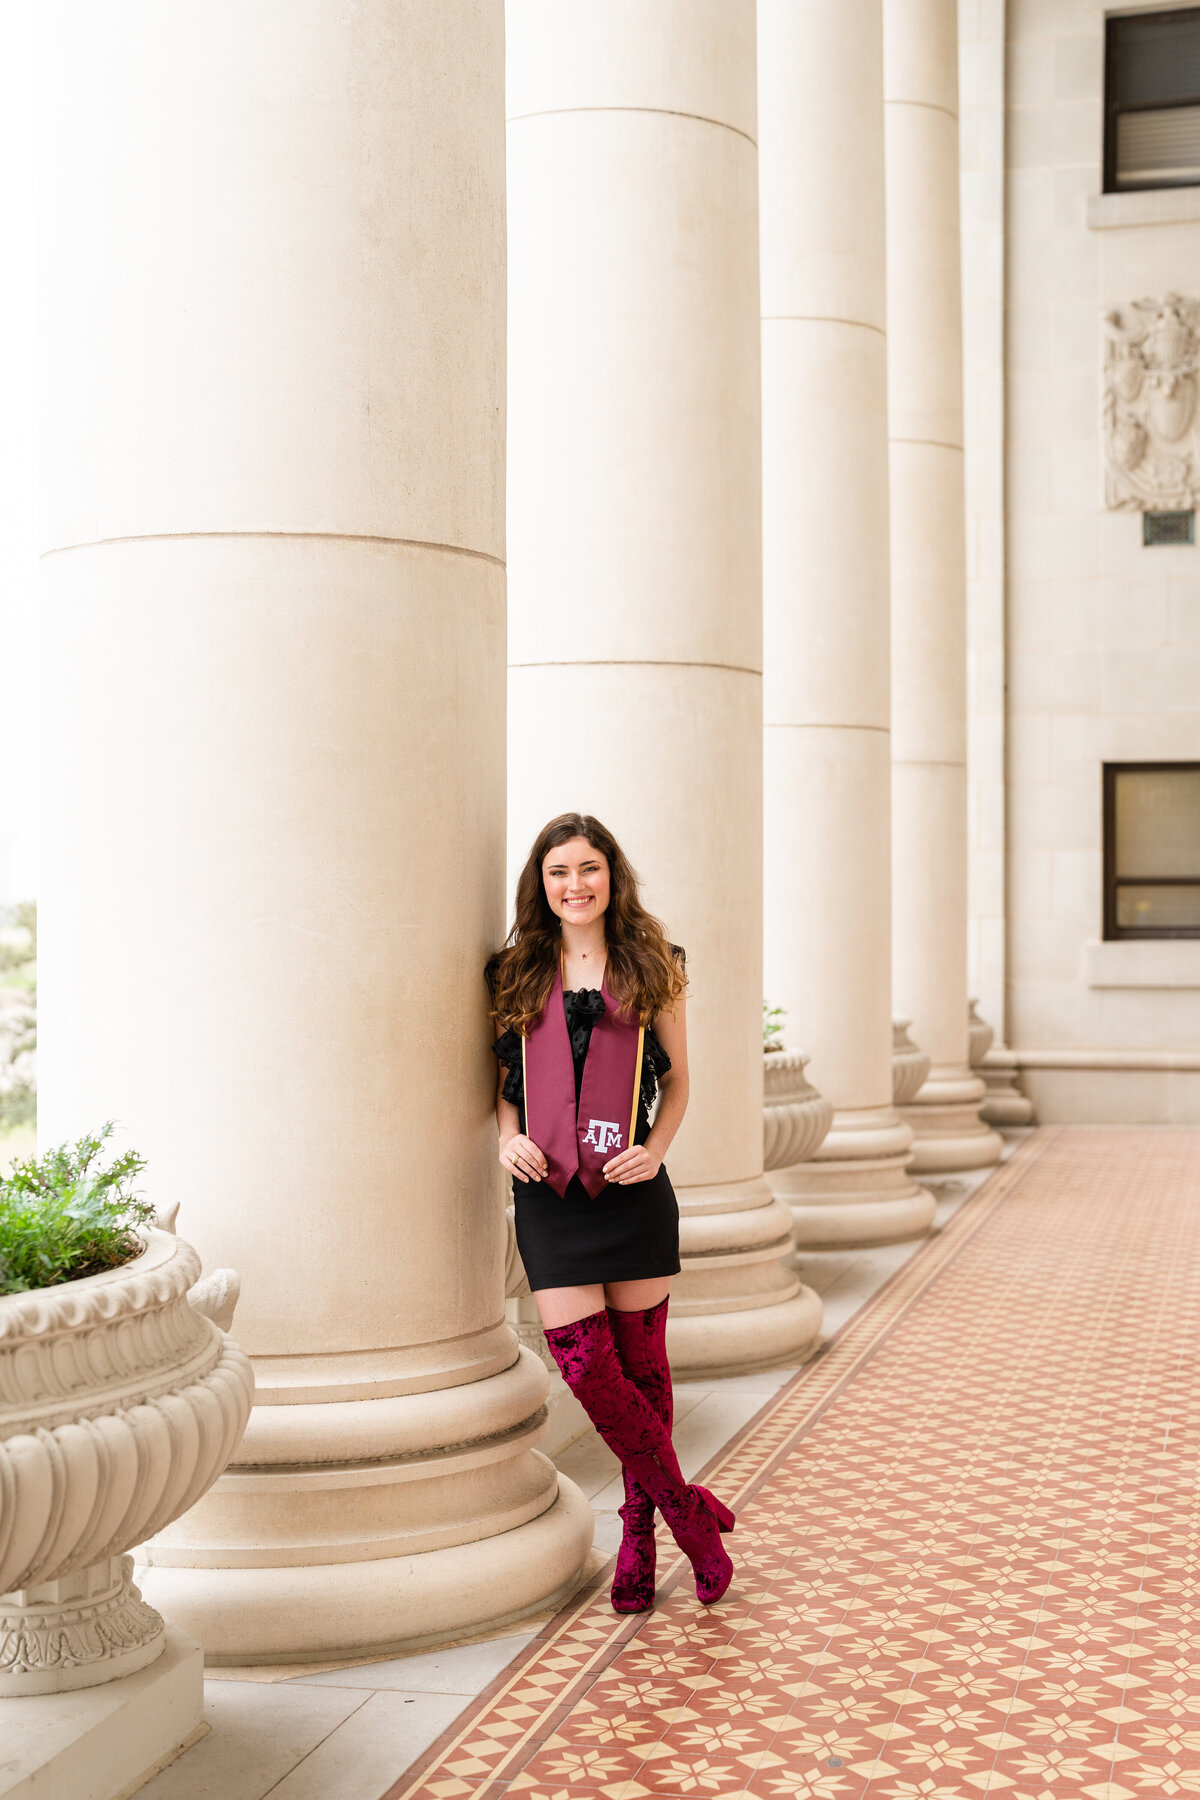 Texas A&M senior girl holding Aggie stole and smiling while leaning against column while wearing black dress and tall maroon boots at Administration Building